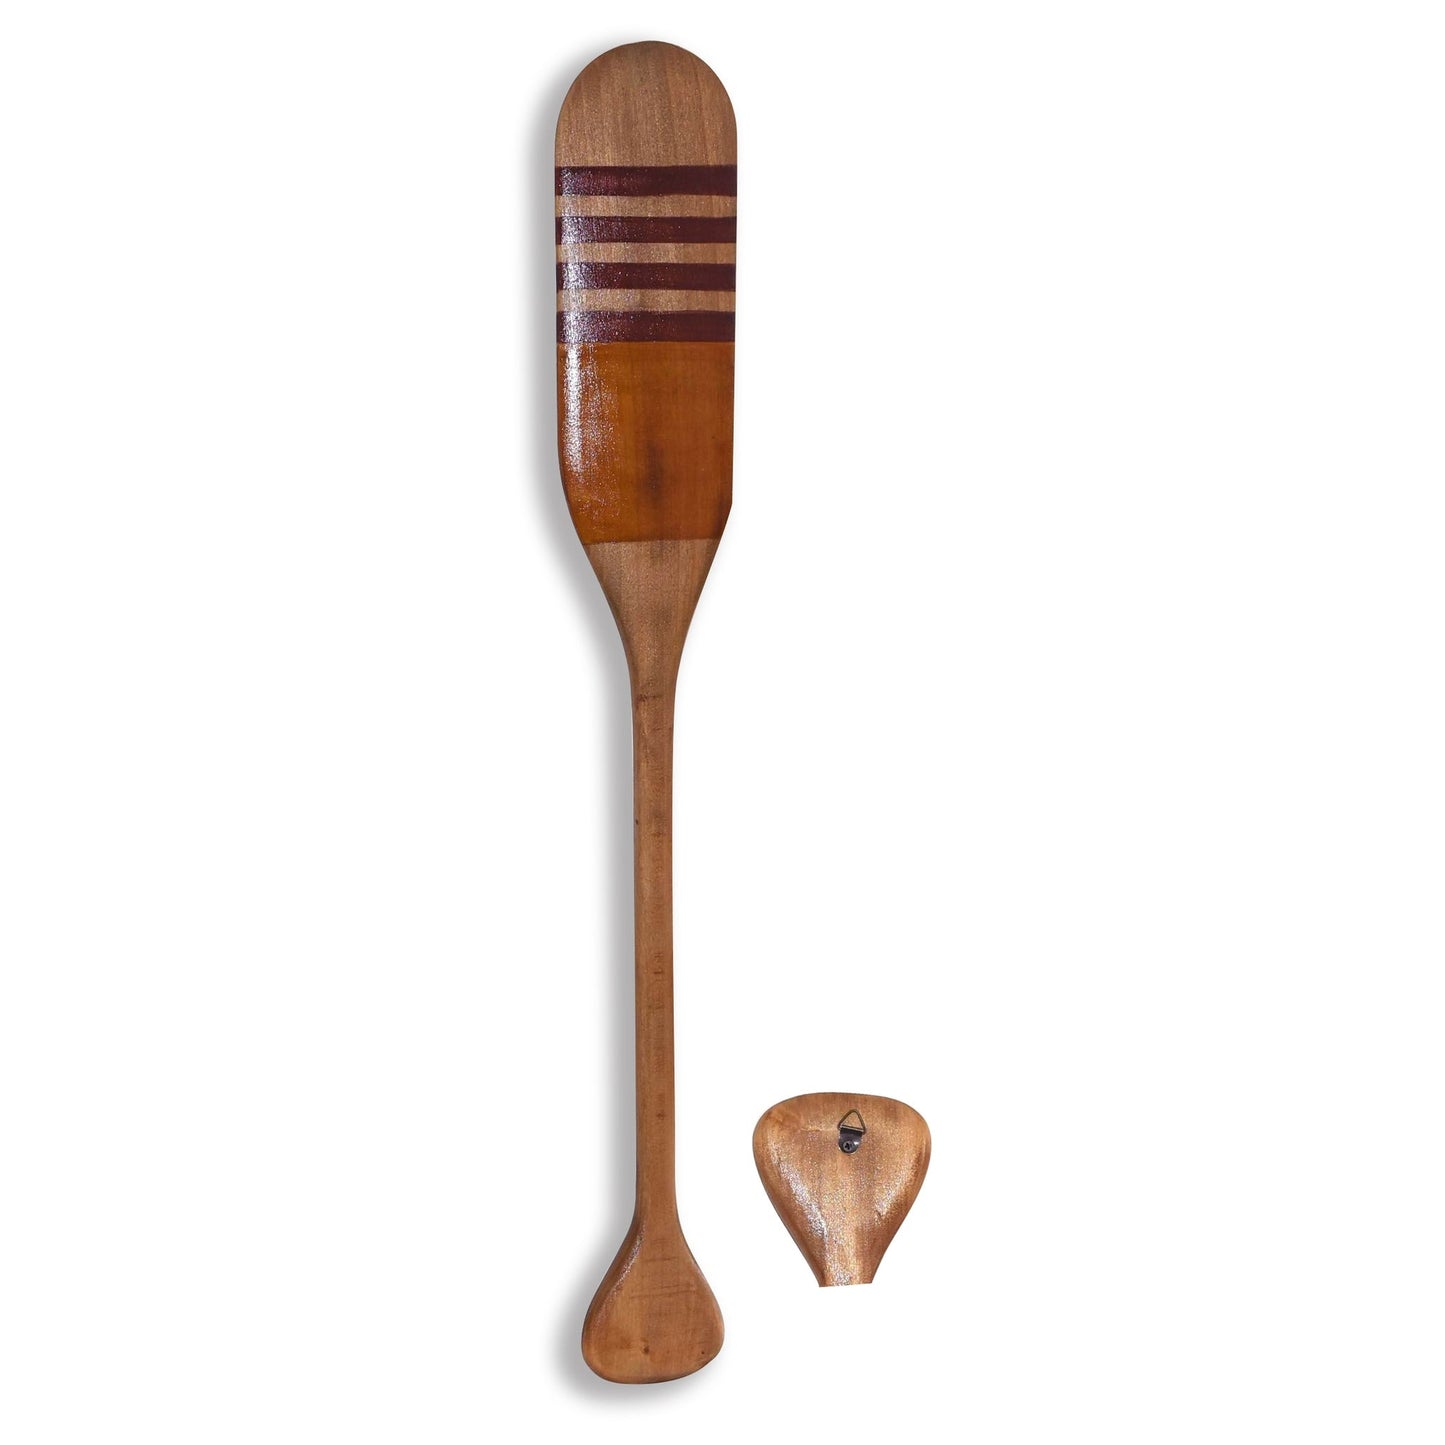 40% Off, Wooden Paddle 70cm